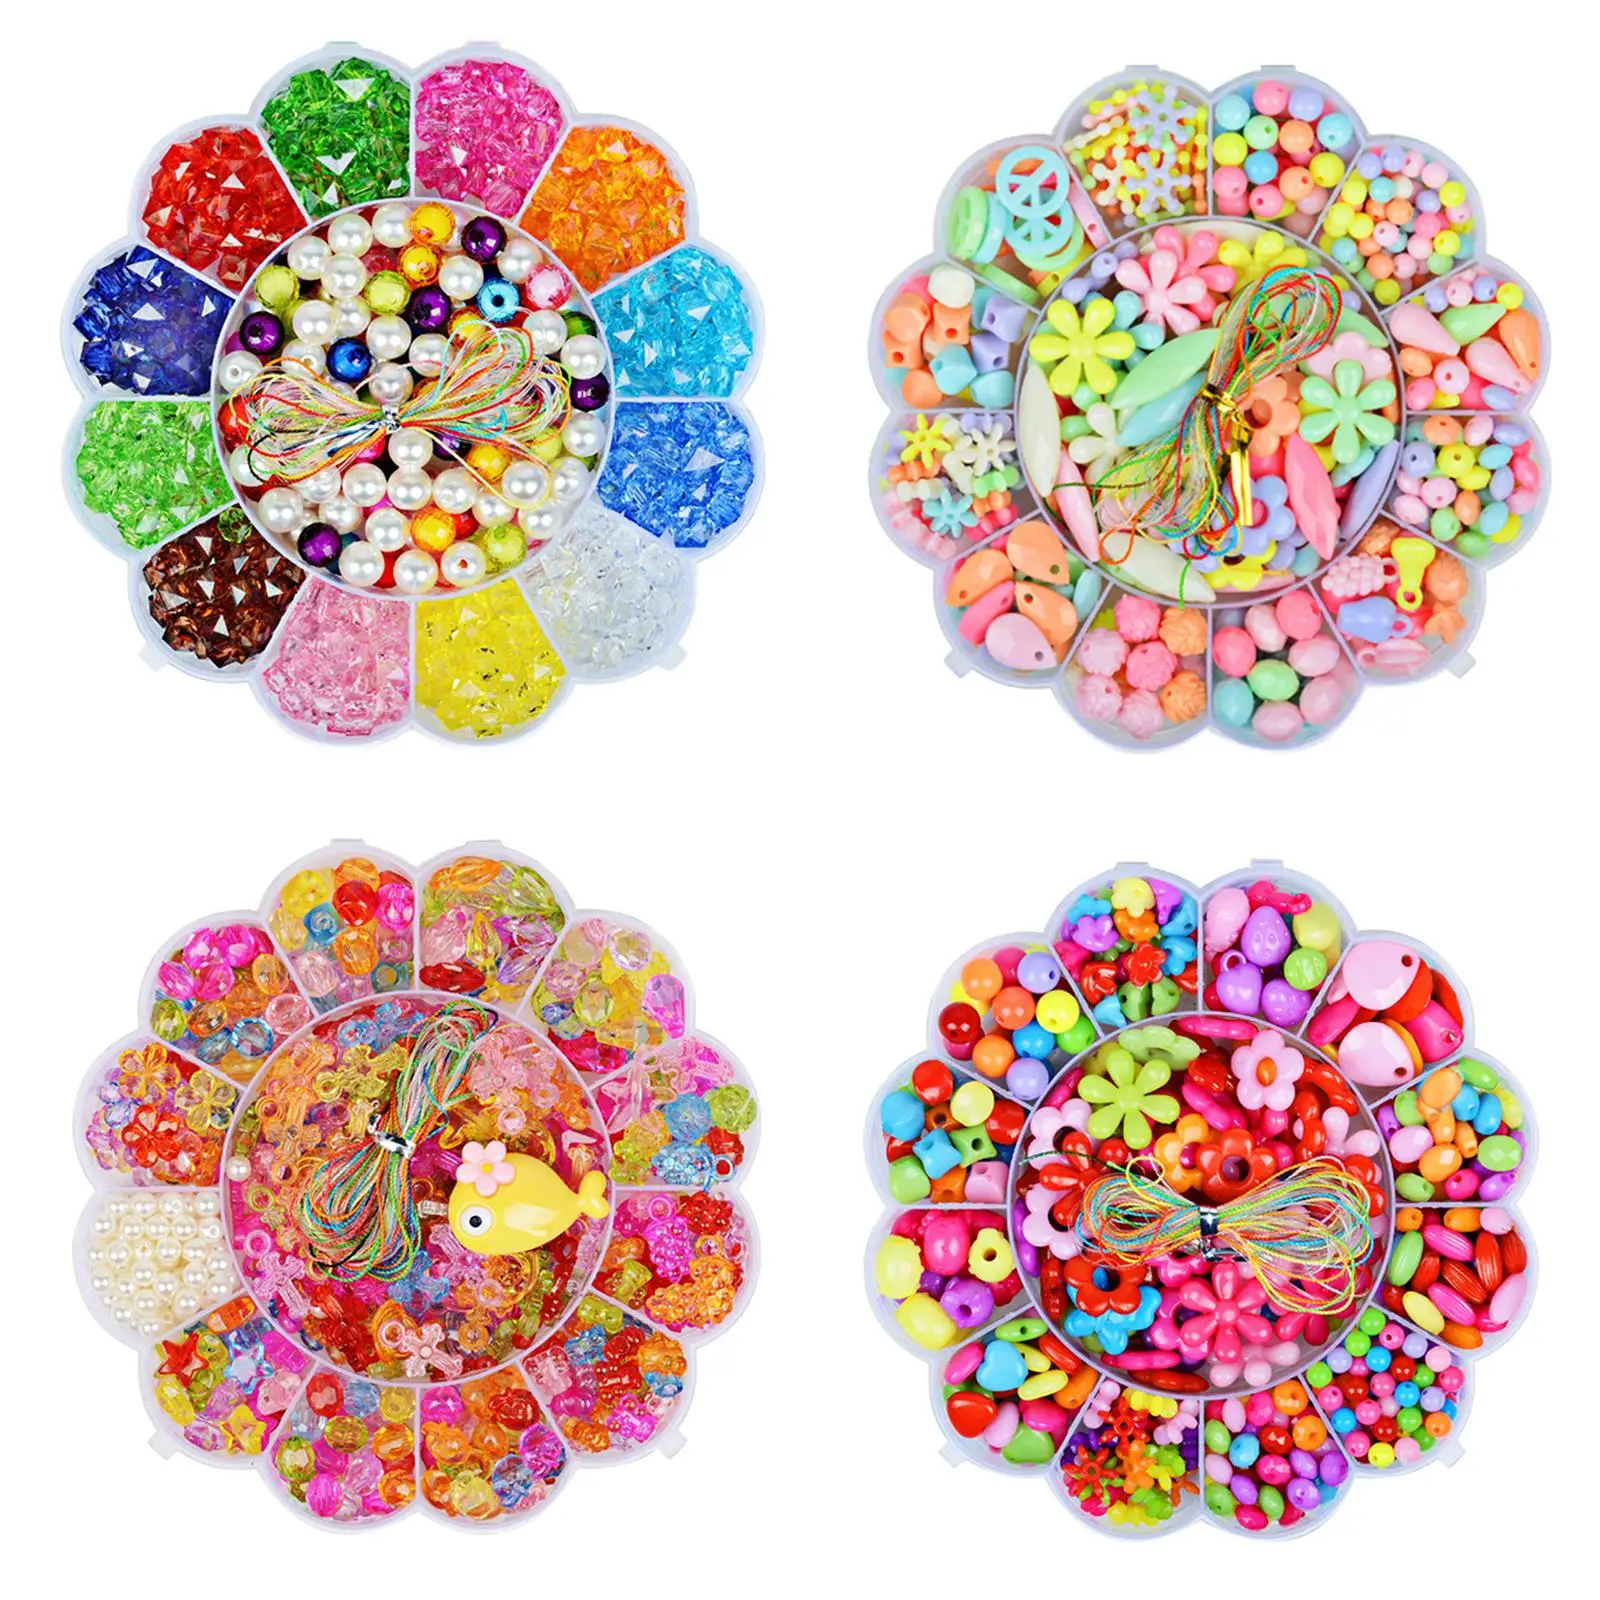 1 Box Beads Colorful Beads Crafts Necklaces DIY Making Kit Beads for Jewelry Making for Friendship Toddlers Girls Teen Kids